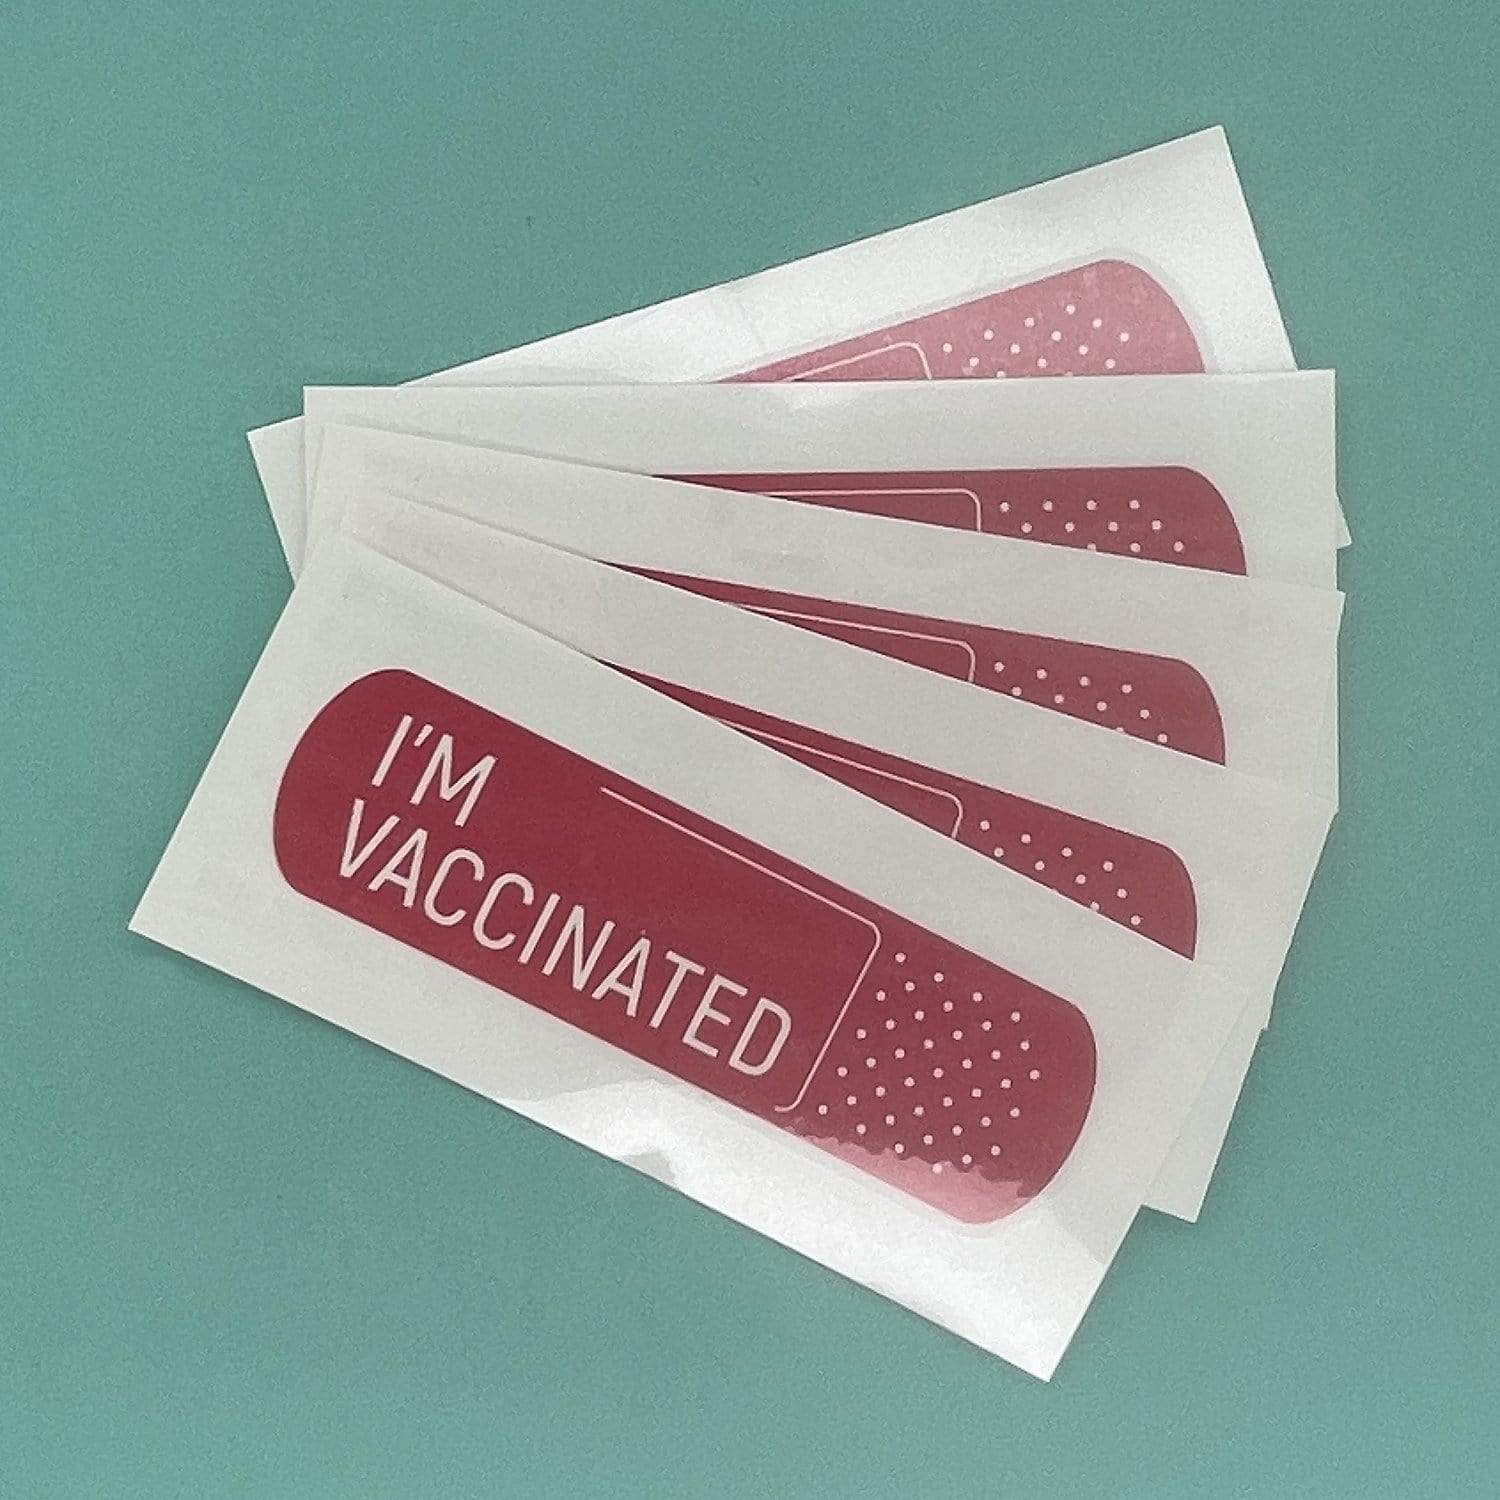 I'm Vaccinated Temporary Tattoos - pack of 5